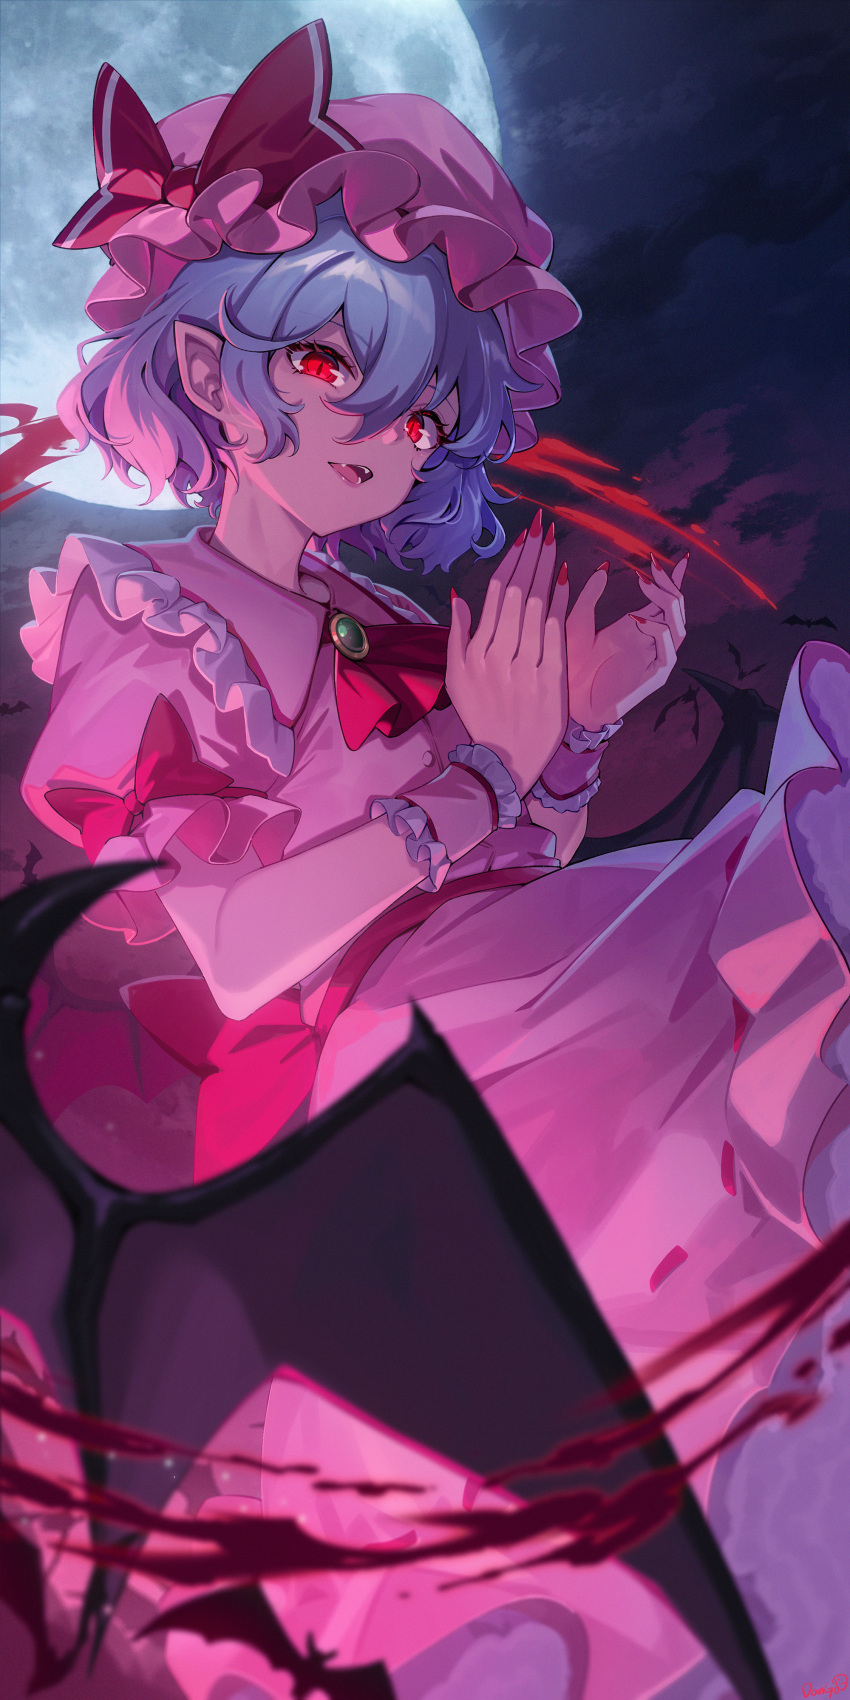 1girl absurdres bat_(animal) bat_wings blue_hair bow dango_remi dress fangs fingernails frilled_dress frills full_moon hat hat_bow highres long_fingernails mob_cap moon open_mouth pink_dress red_eyes red_nails remilia_scarlet short_sleeves slit_pupils touhou vampire wings wrist_cuffs